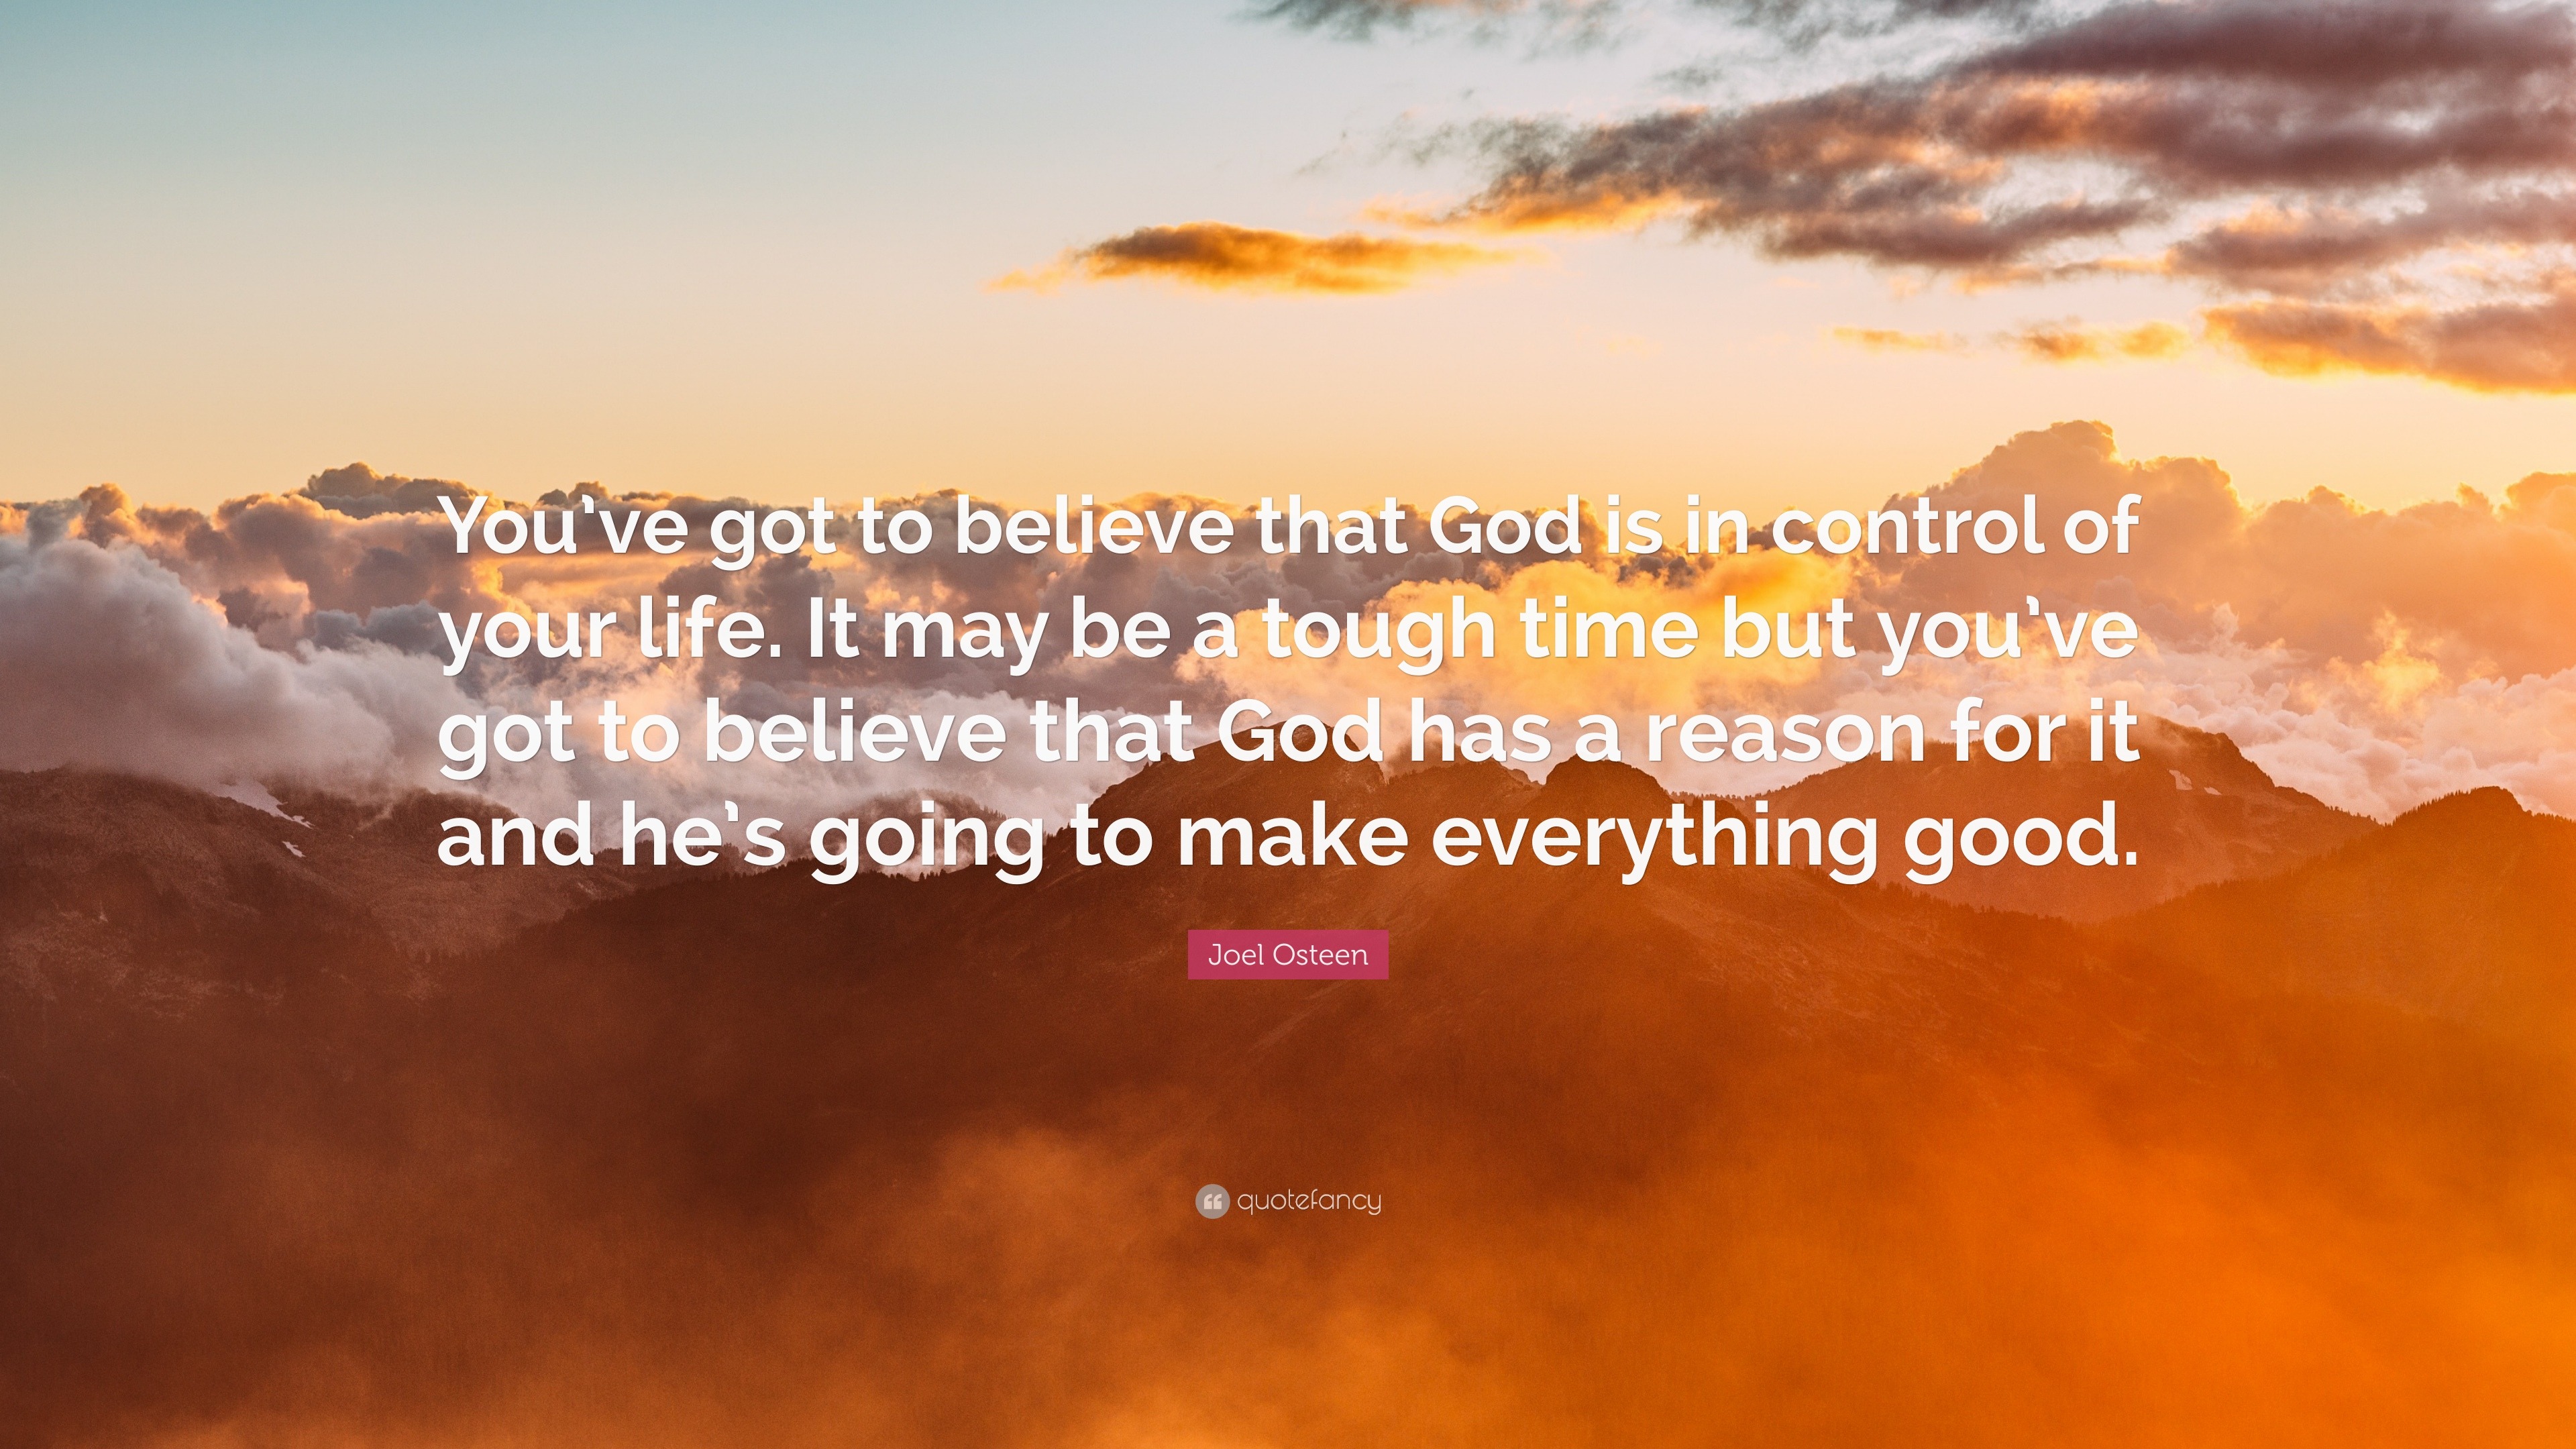 Joel Osteen Quote “You ve got to believe that God is in control